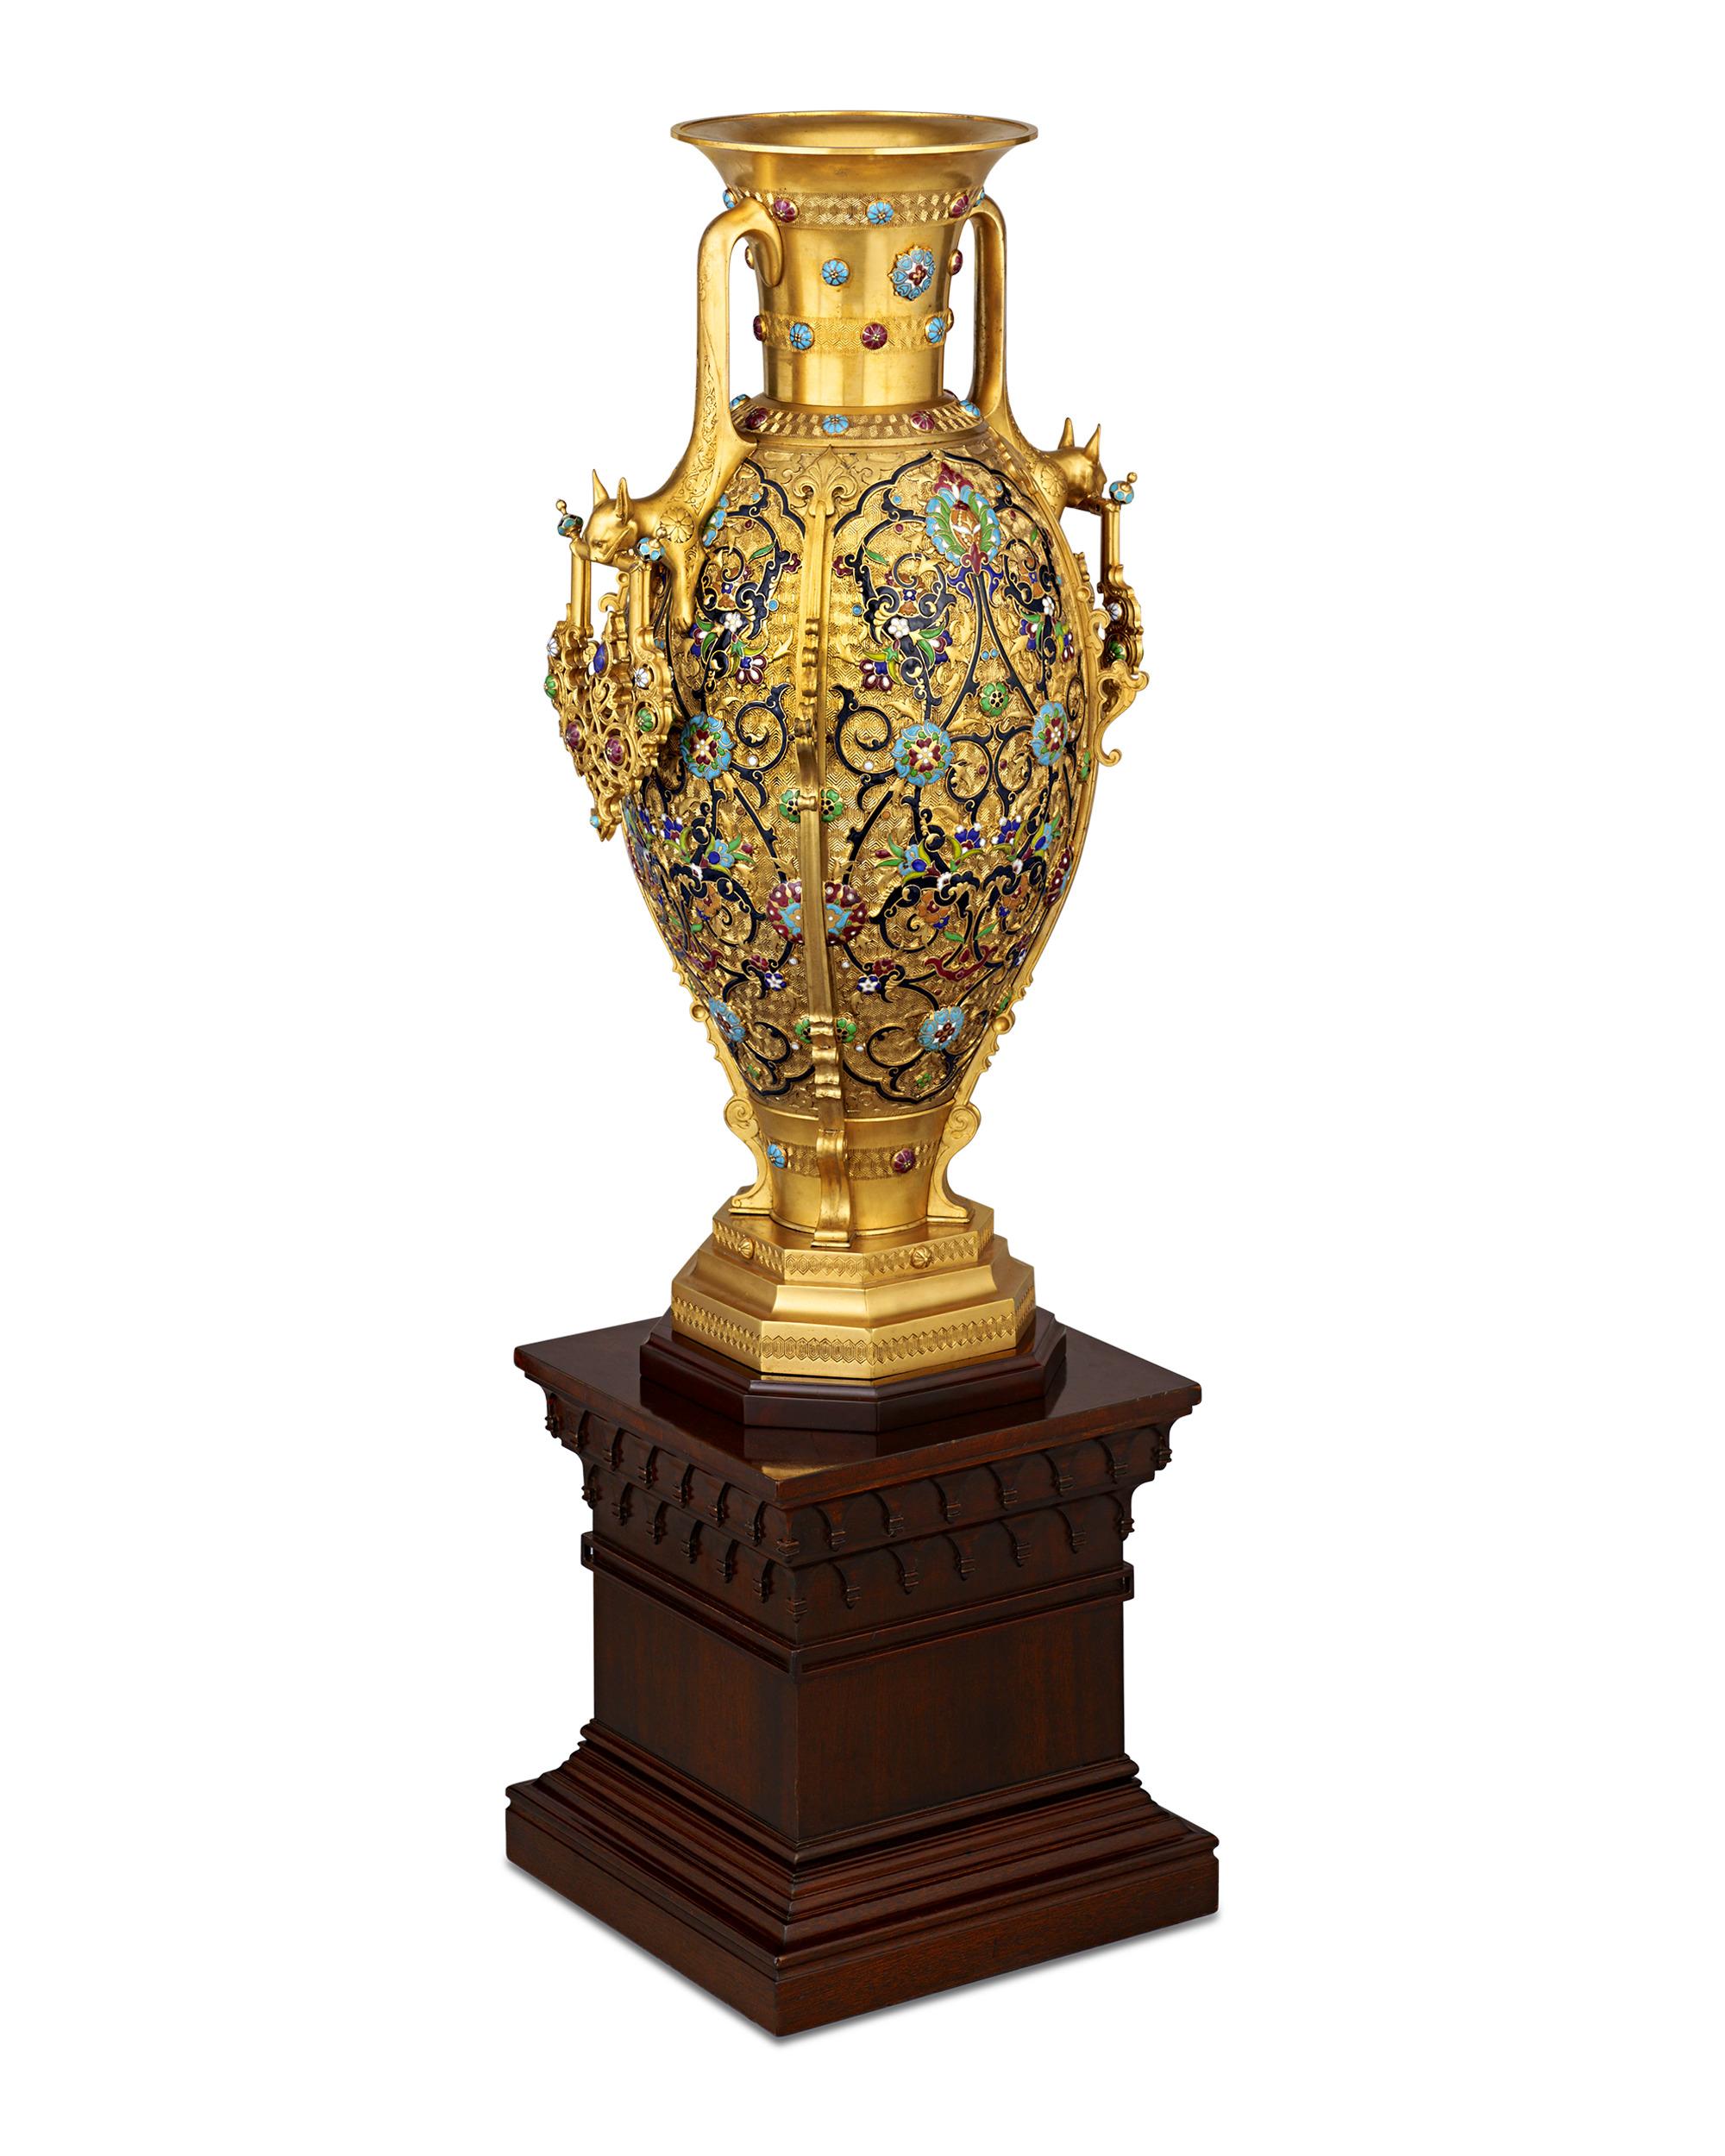 This monumental gilt-bronze and enamel vase marries the imaginative designs of Édouard Lièvre’s ‘le style japonais et chinois’ and the technical prowess of renowned bronzier Ferdinand Barbedienne. The urn features elaborate decoration and two